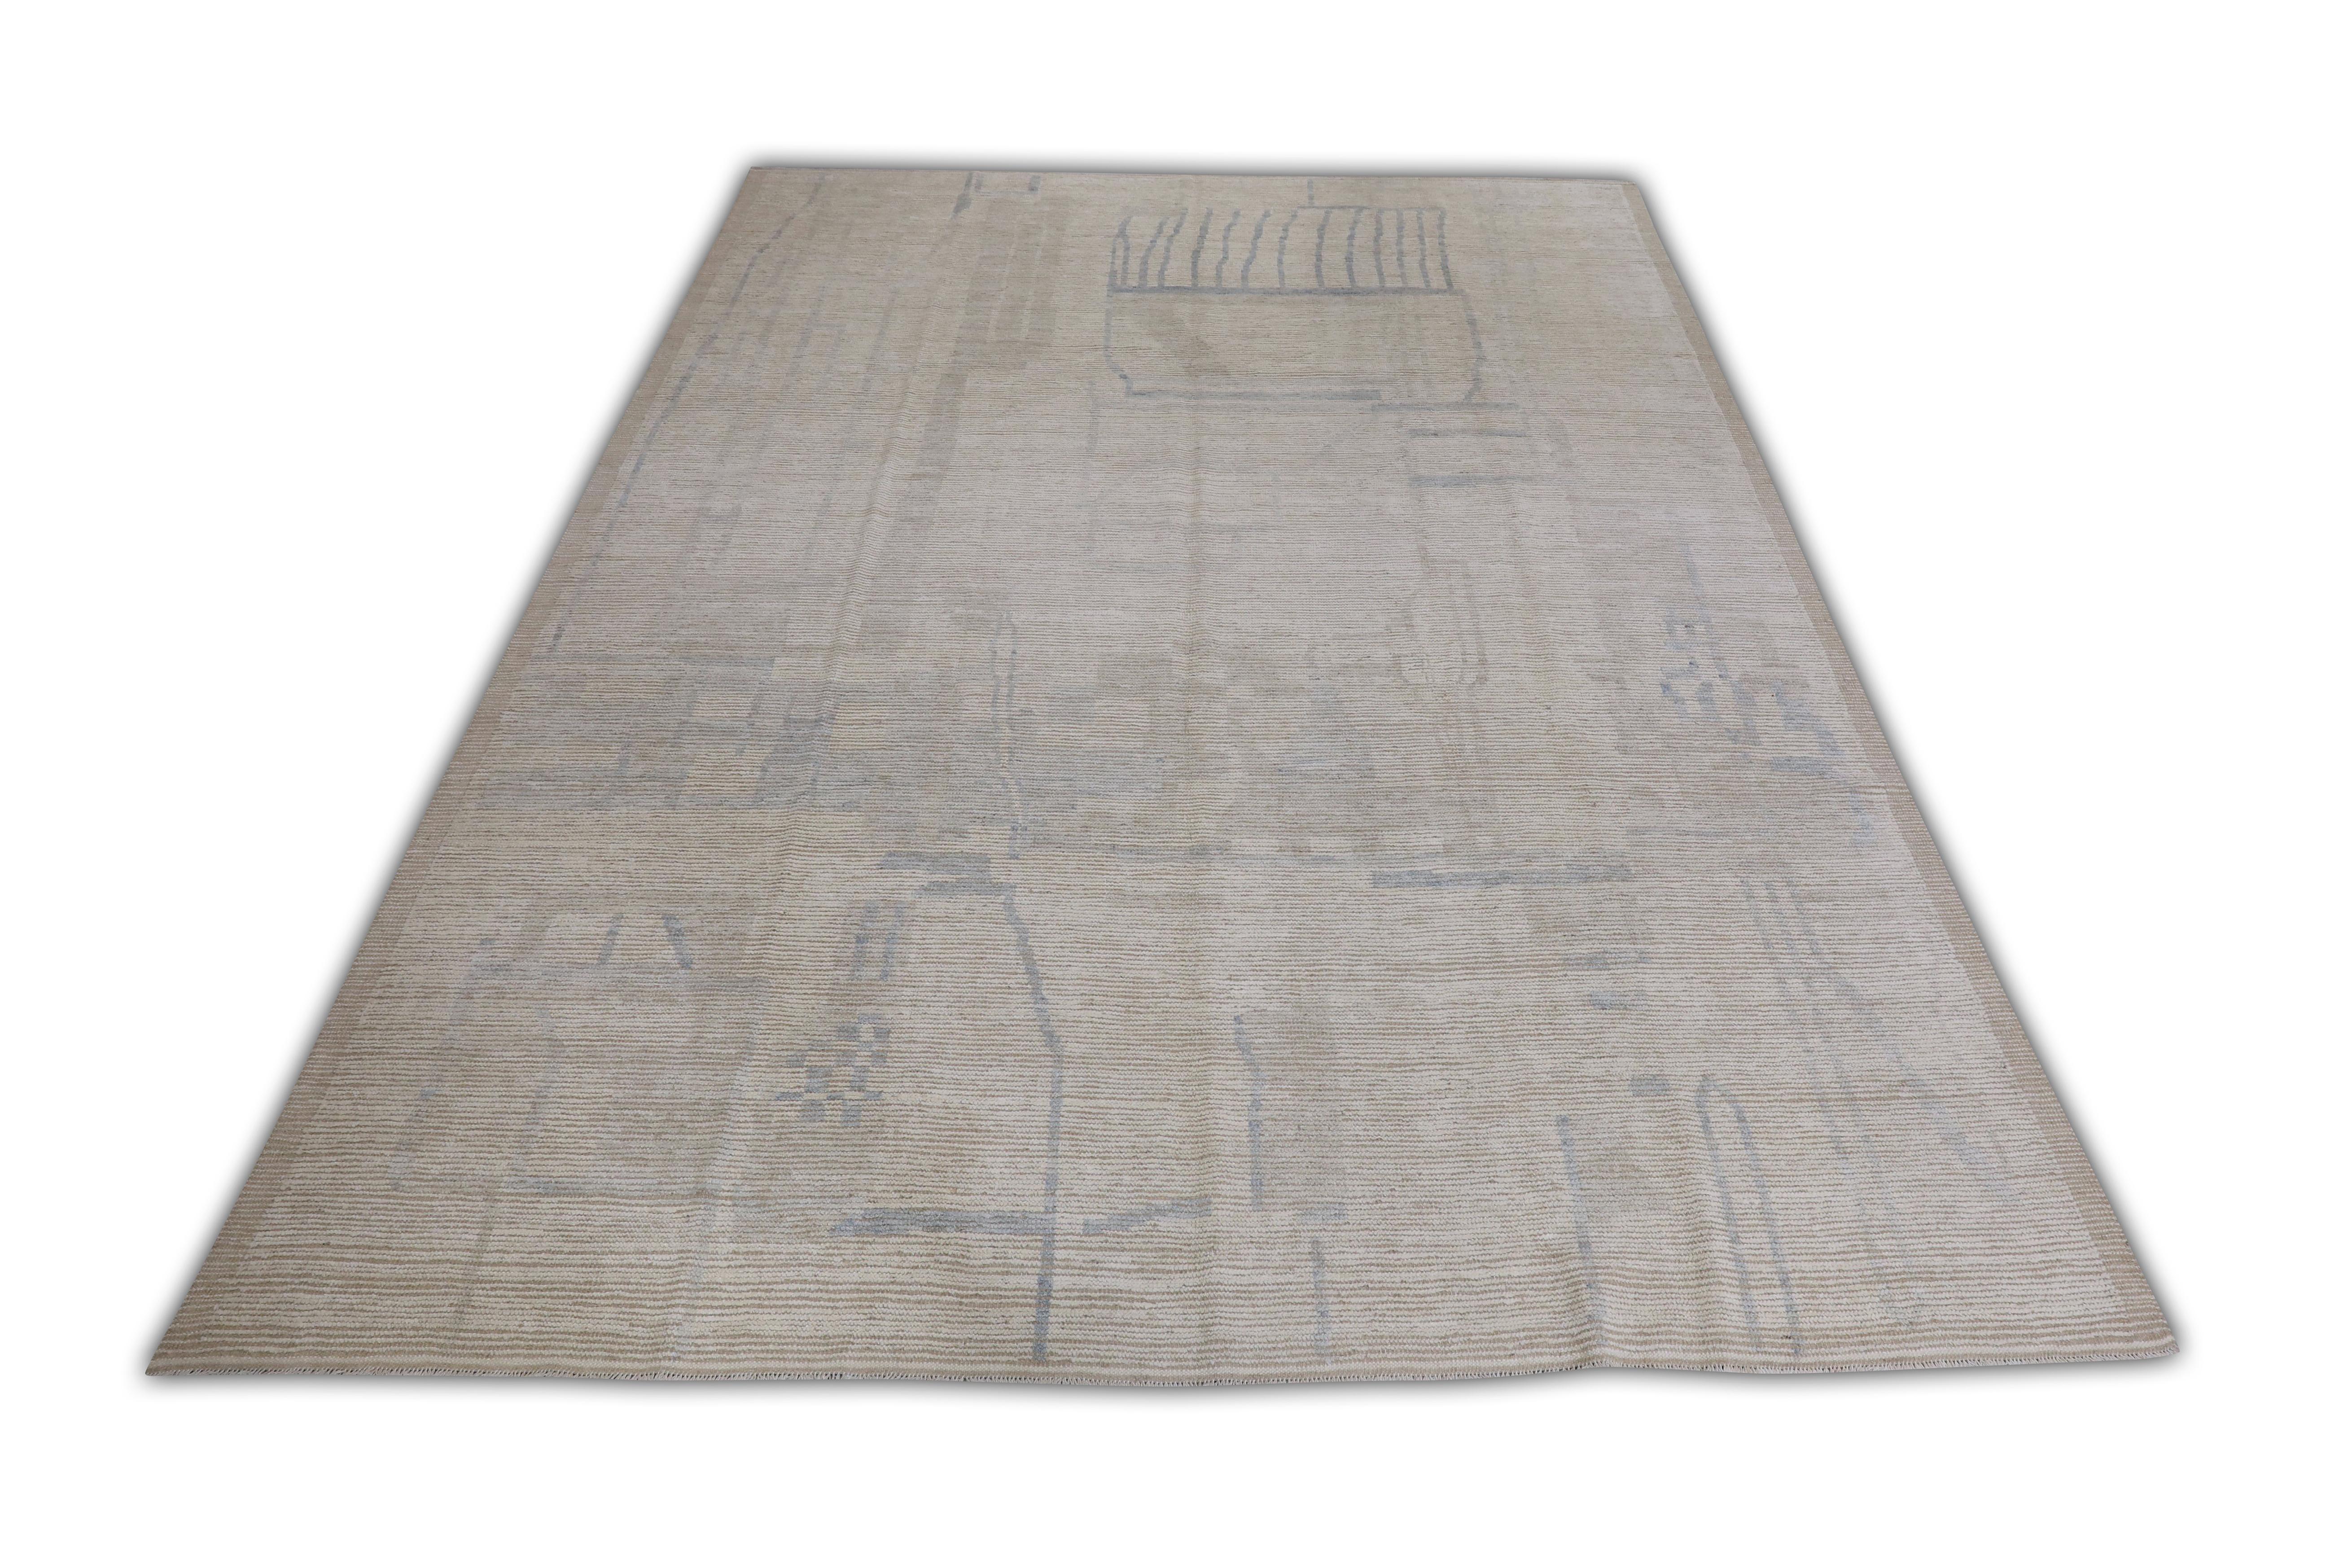 A stunning modern Turkish Tulu rug that is sure to add a touch of warmth and luxury to any space. This rug has been meticulously handwoven using traditional techniques, ensuring its quality and durability.

The rug is made with 100% natural